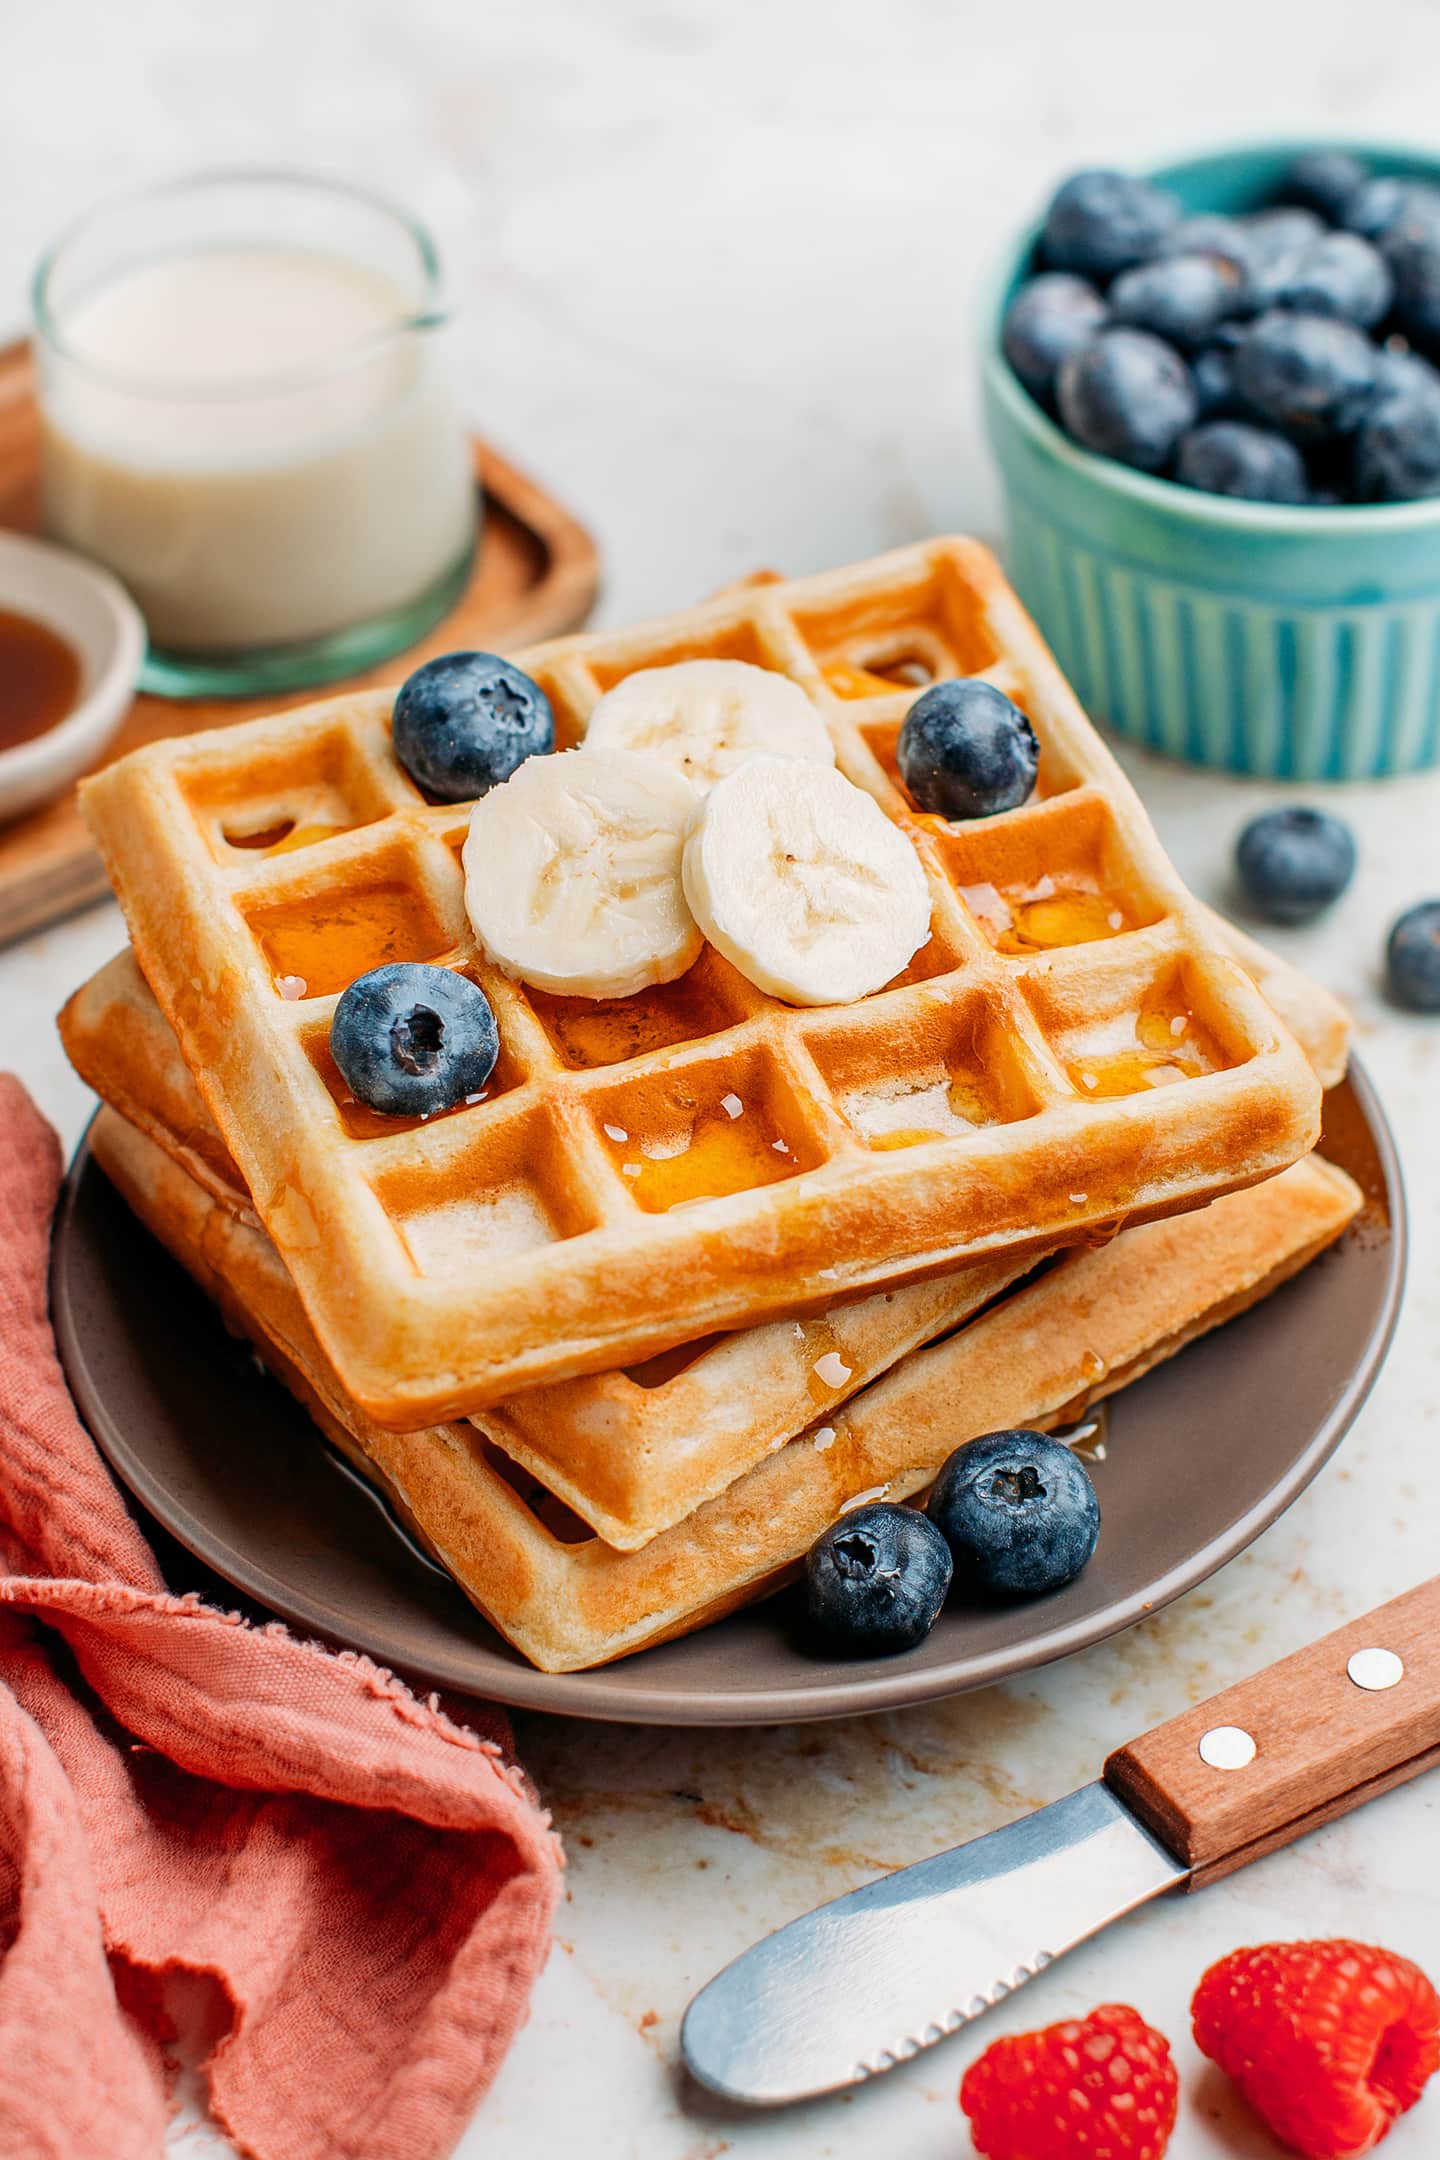 Vegan waffles topped with maple syrup, blueberries, and bananas.